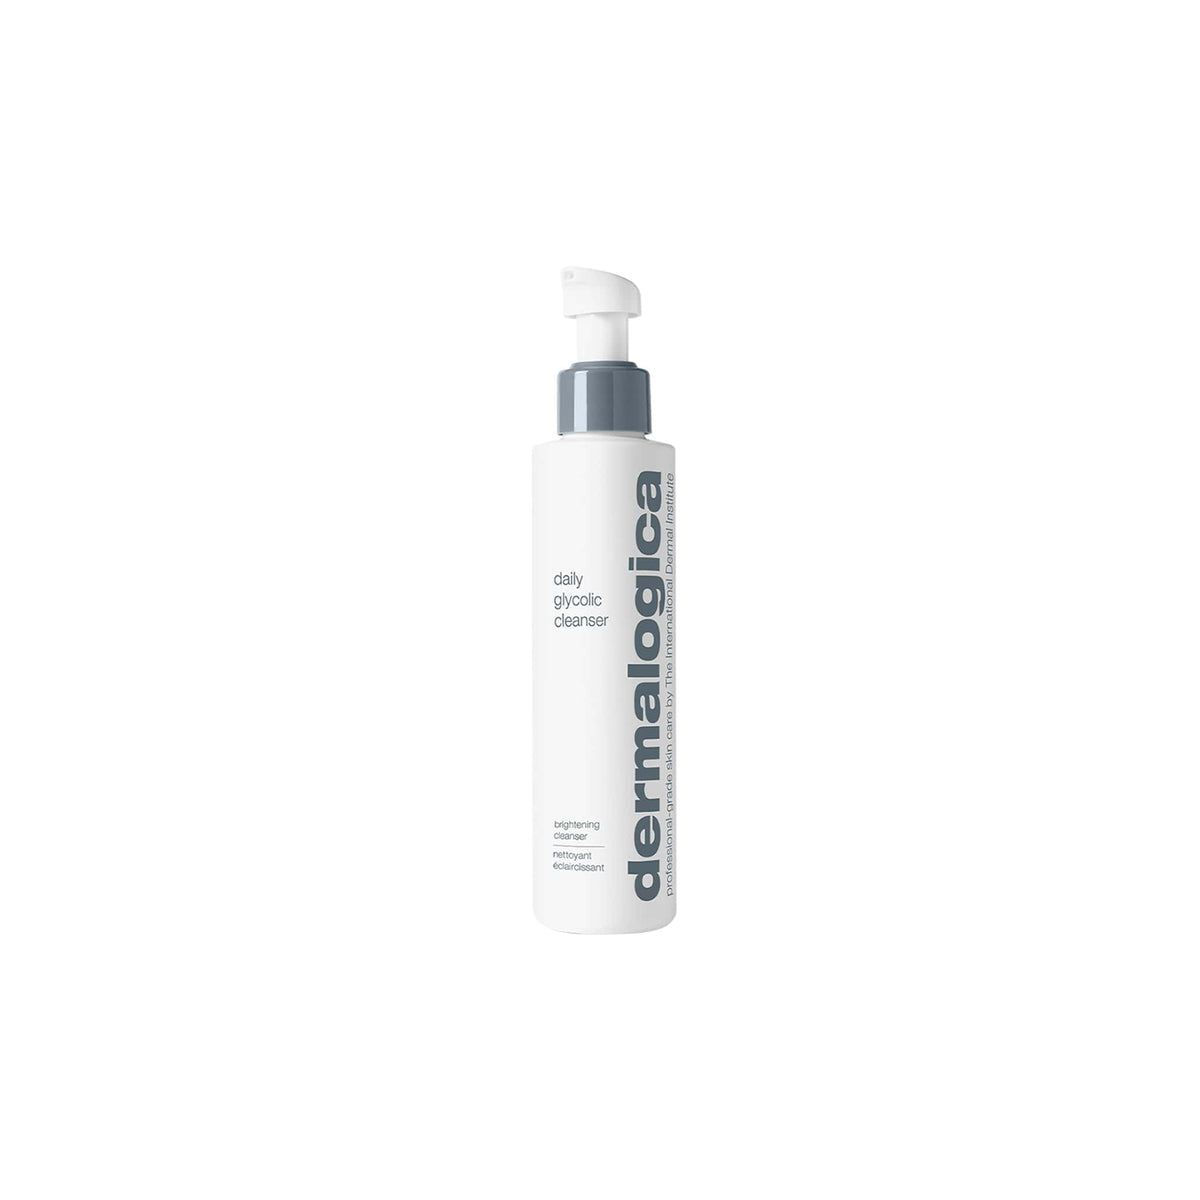 Dermalogica Daily Glycolic Cleanser - Shop Online | Retail Box